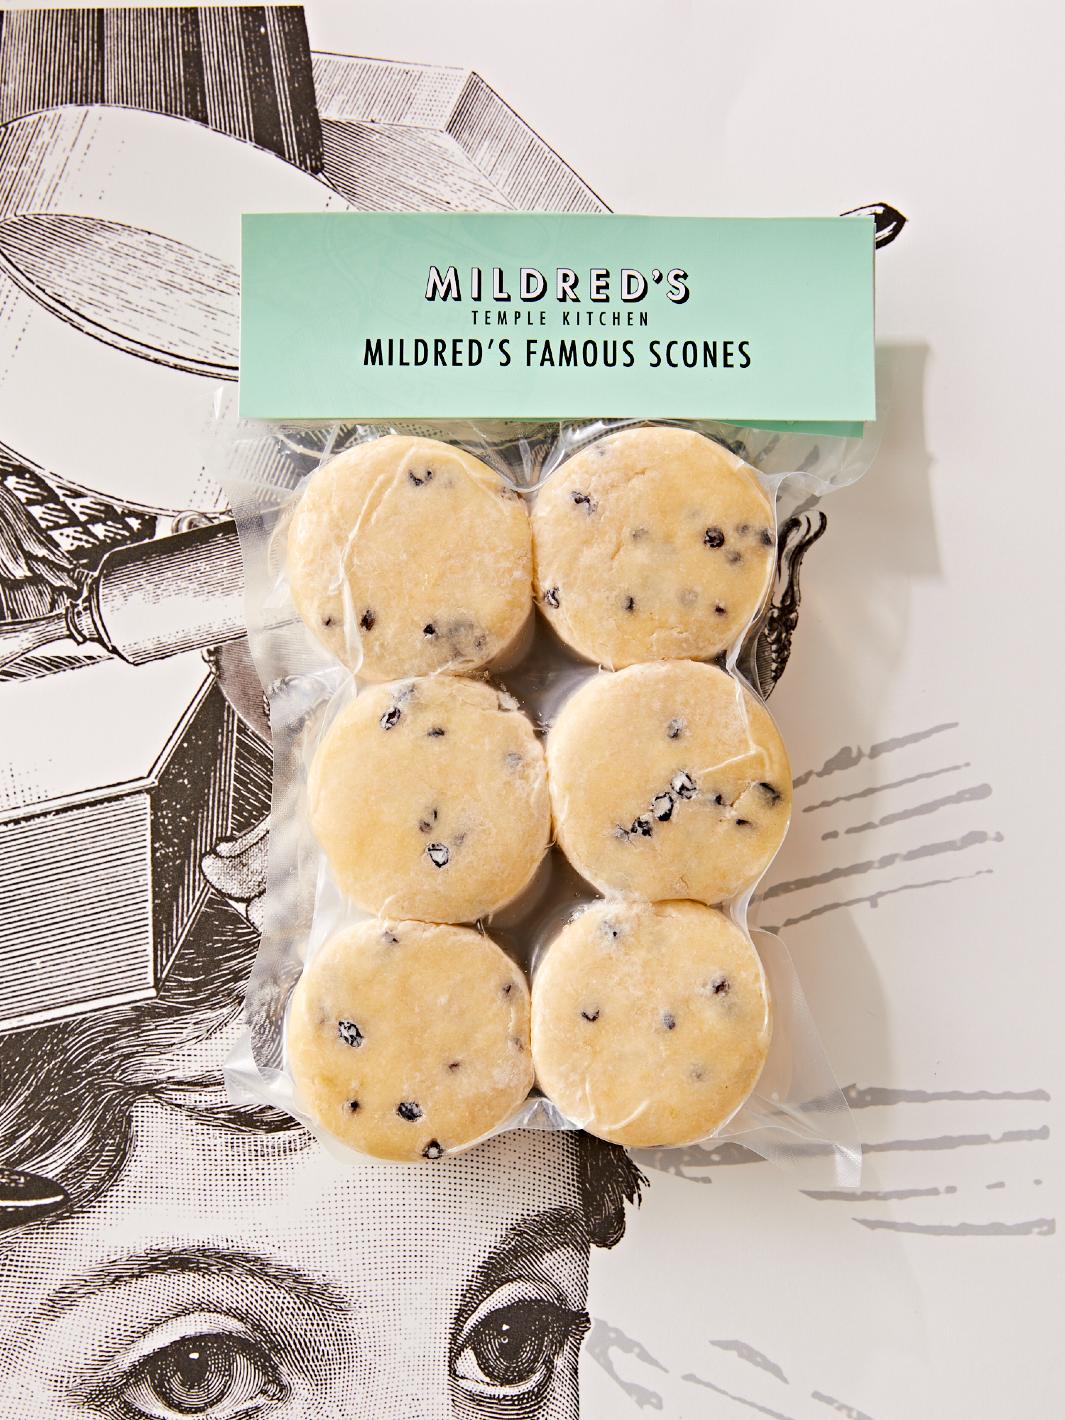 Mildred's Temple Kitchen famous scones frozen ready-to-bake